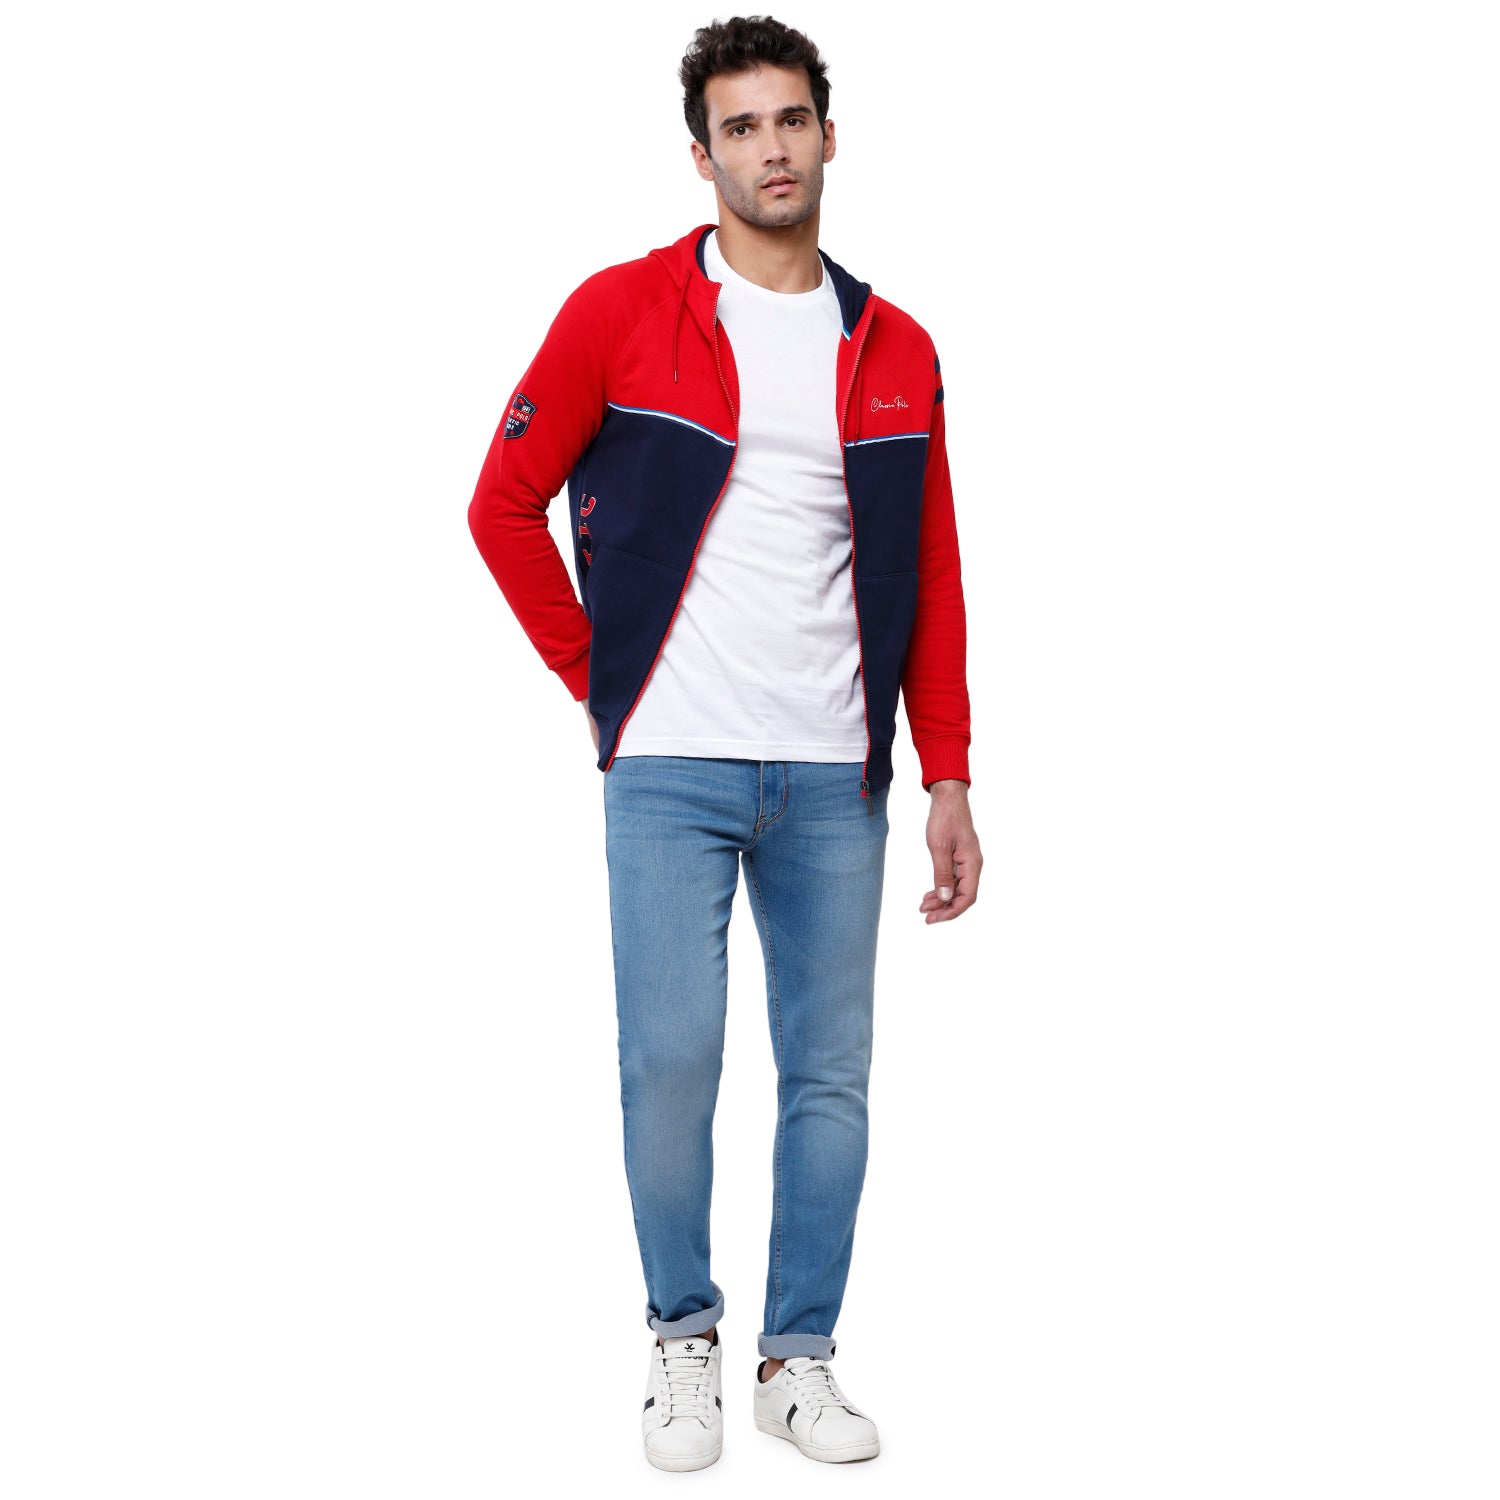 Classic Polo Men's Color Block Full Sleeve Red & Navy Hood Sweat Shirt - CPSS-330B Sweat Shirts Classic Polo 